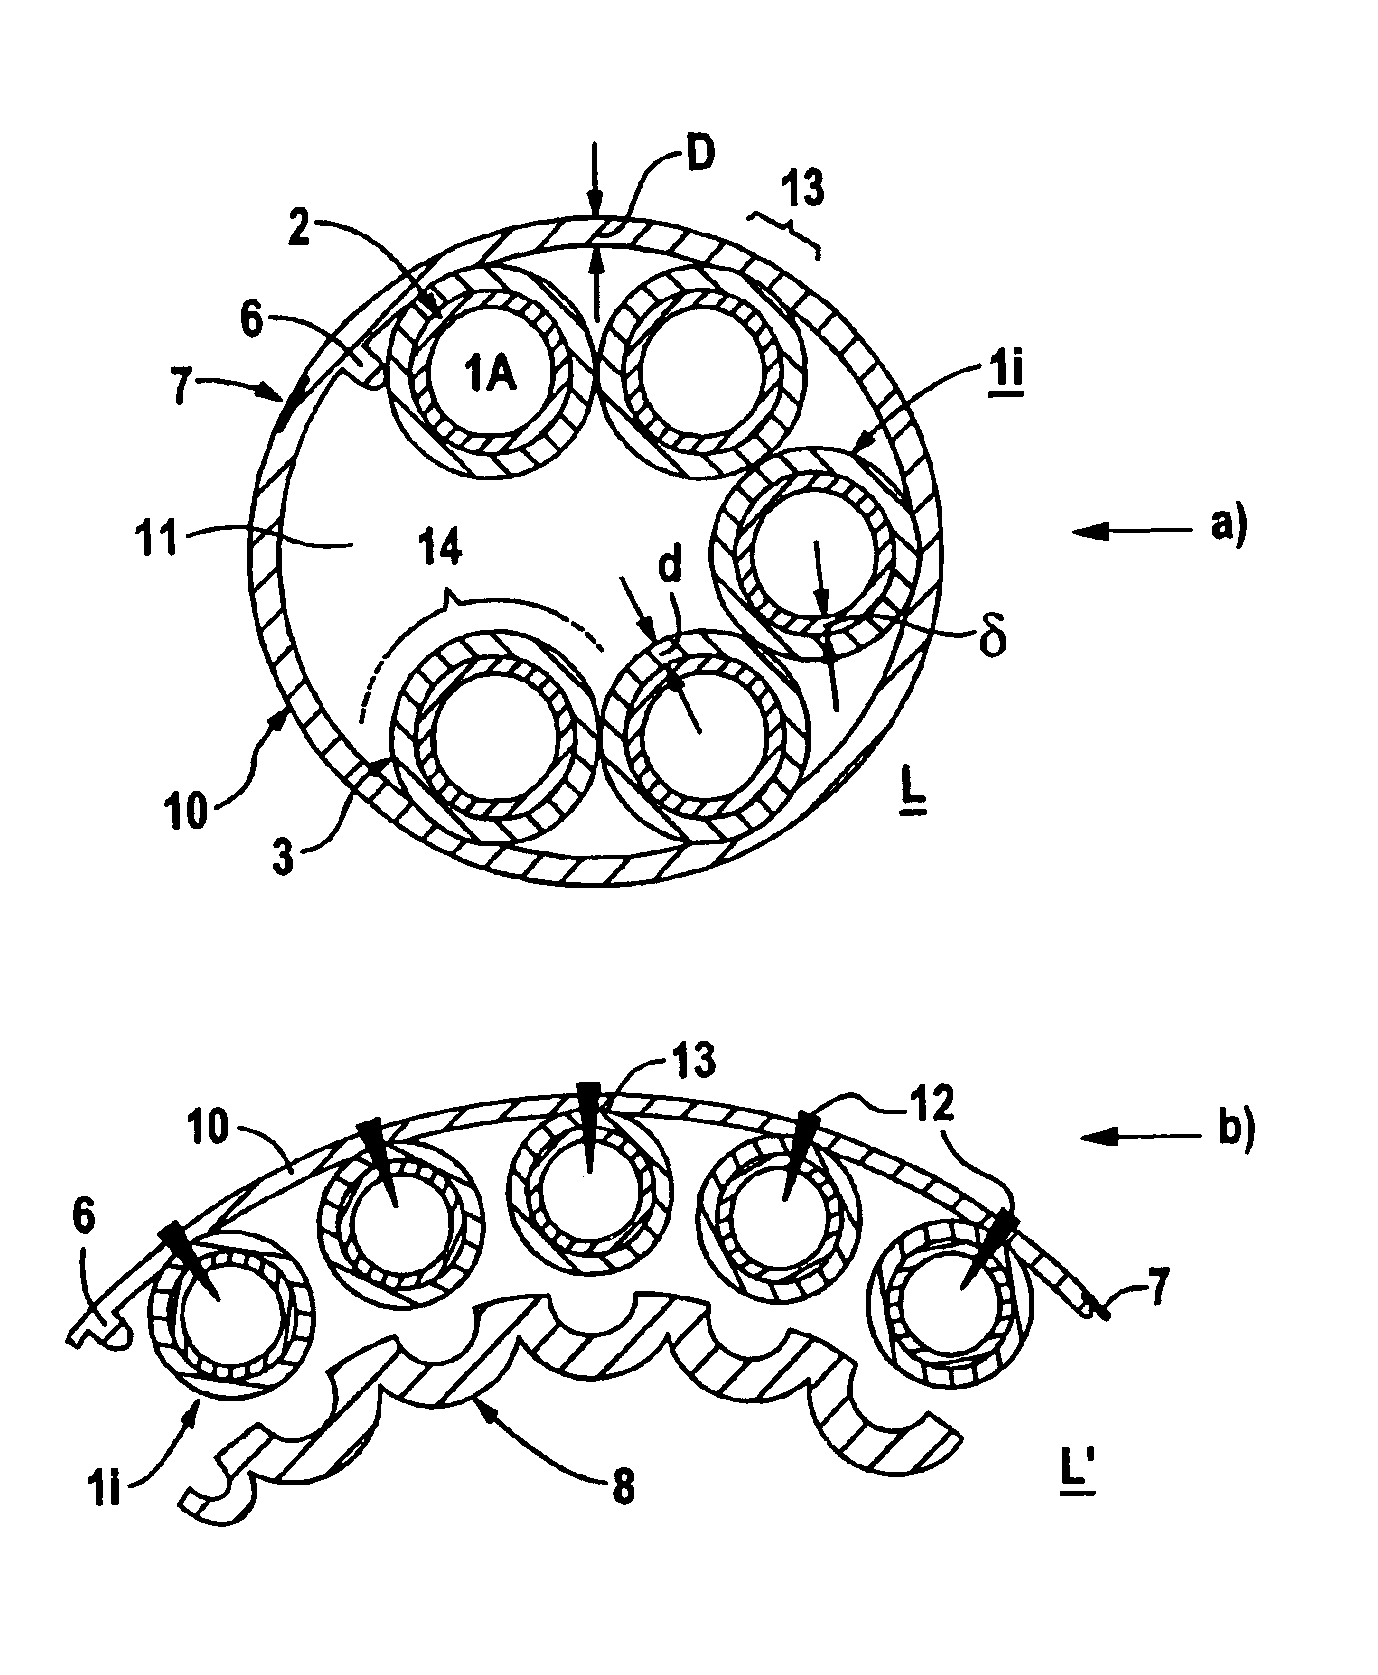 Multi conductor arrangement for transferring energy and/or data